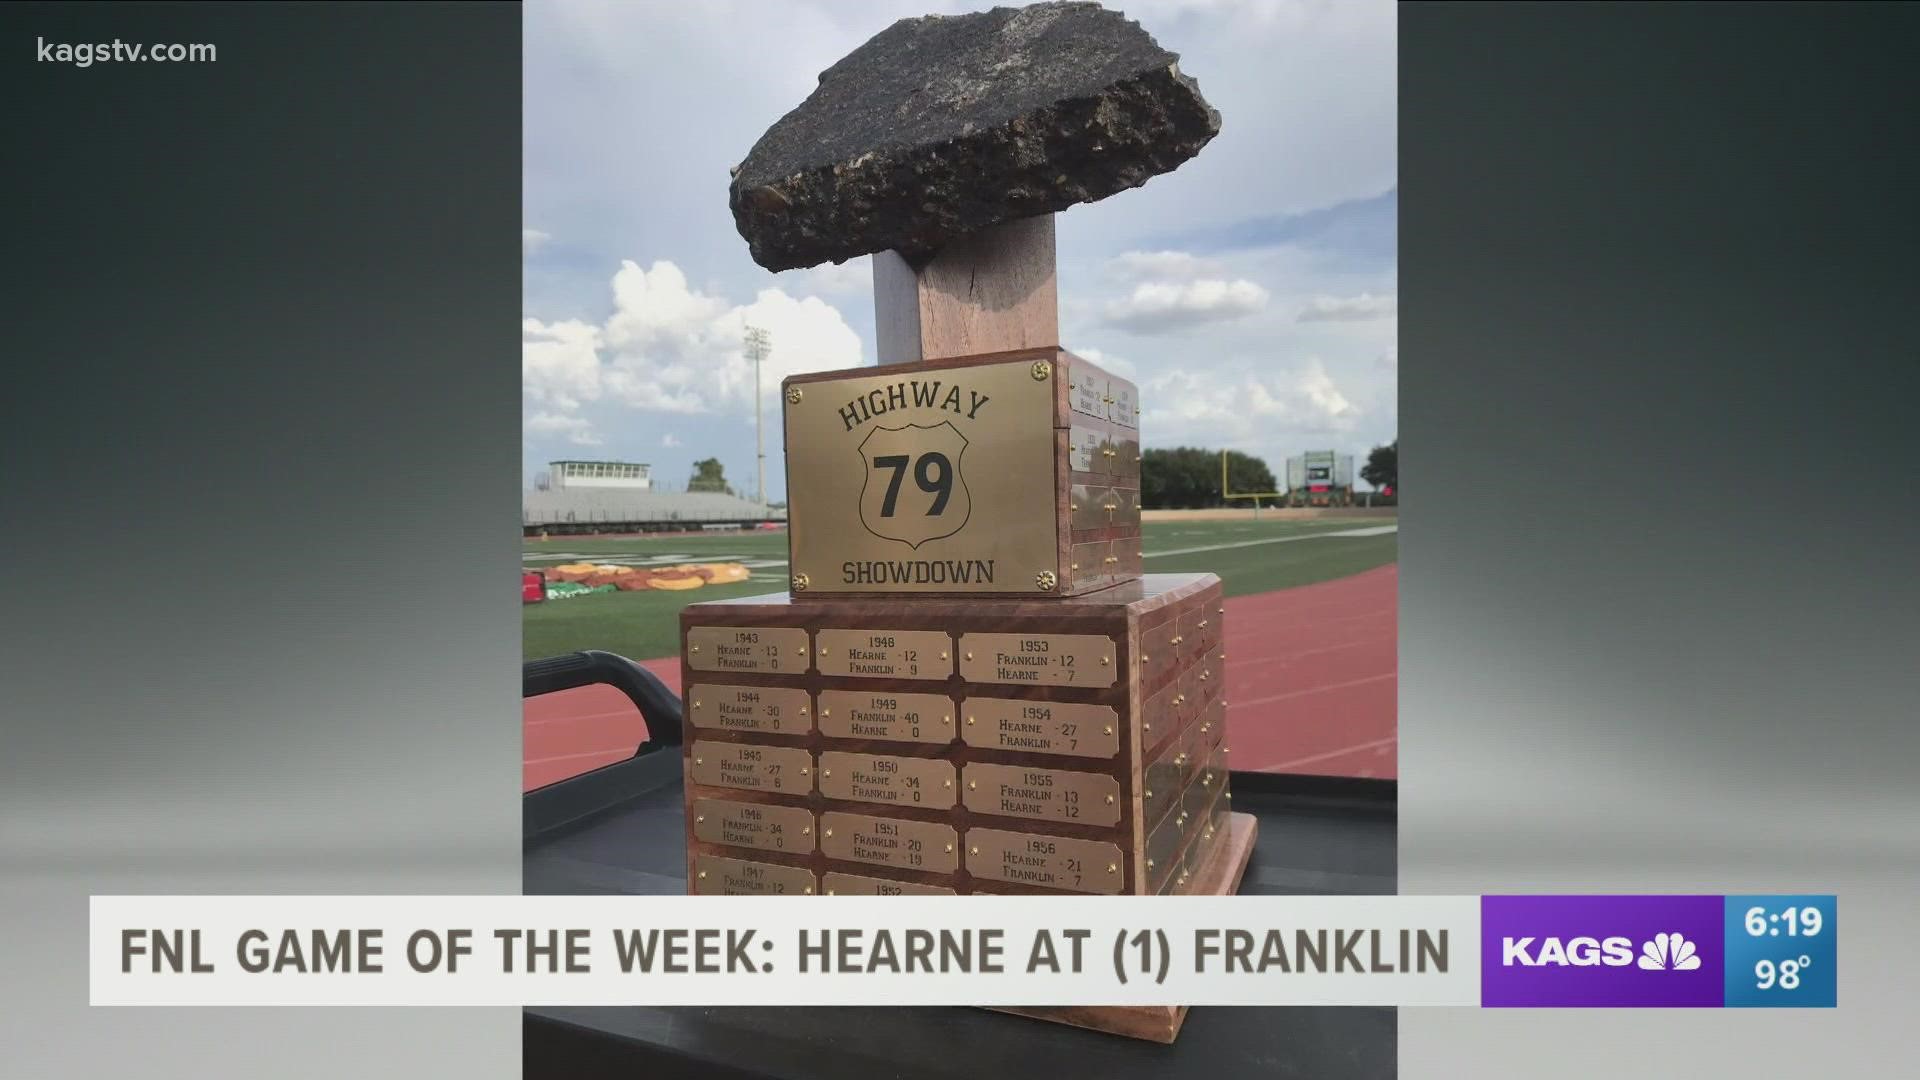 Hearne is Looking to Beat Franklin for the First Time Since 2006 in the FNL Game of the Week